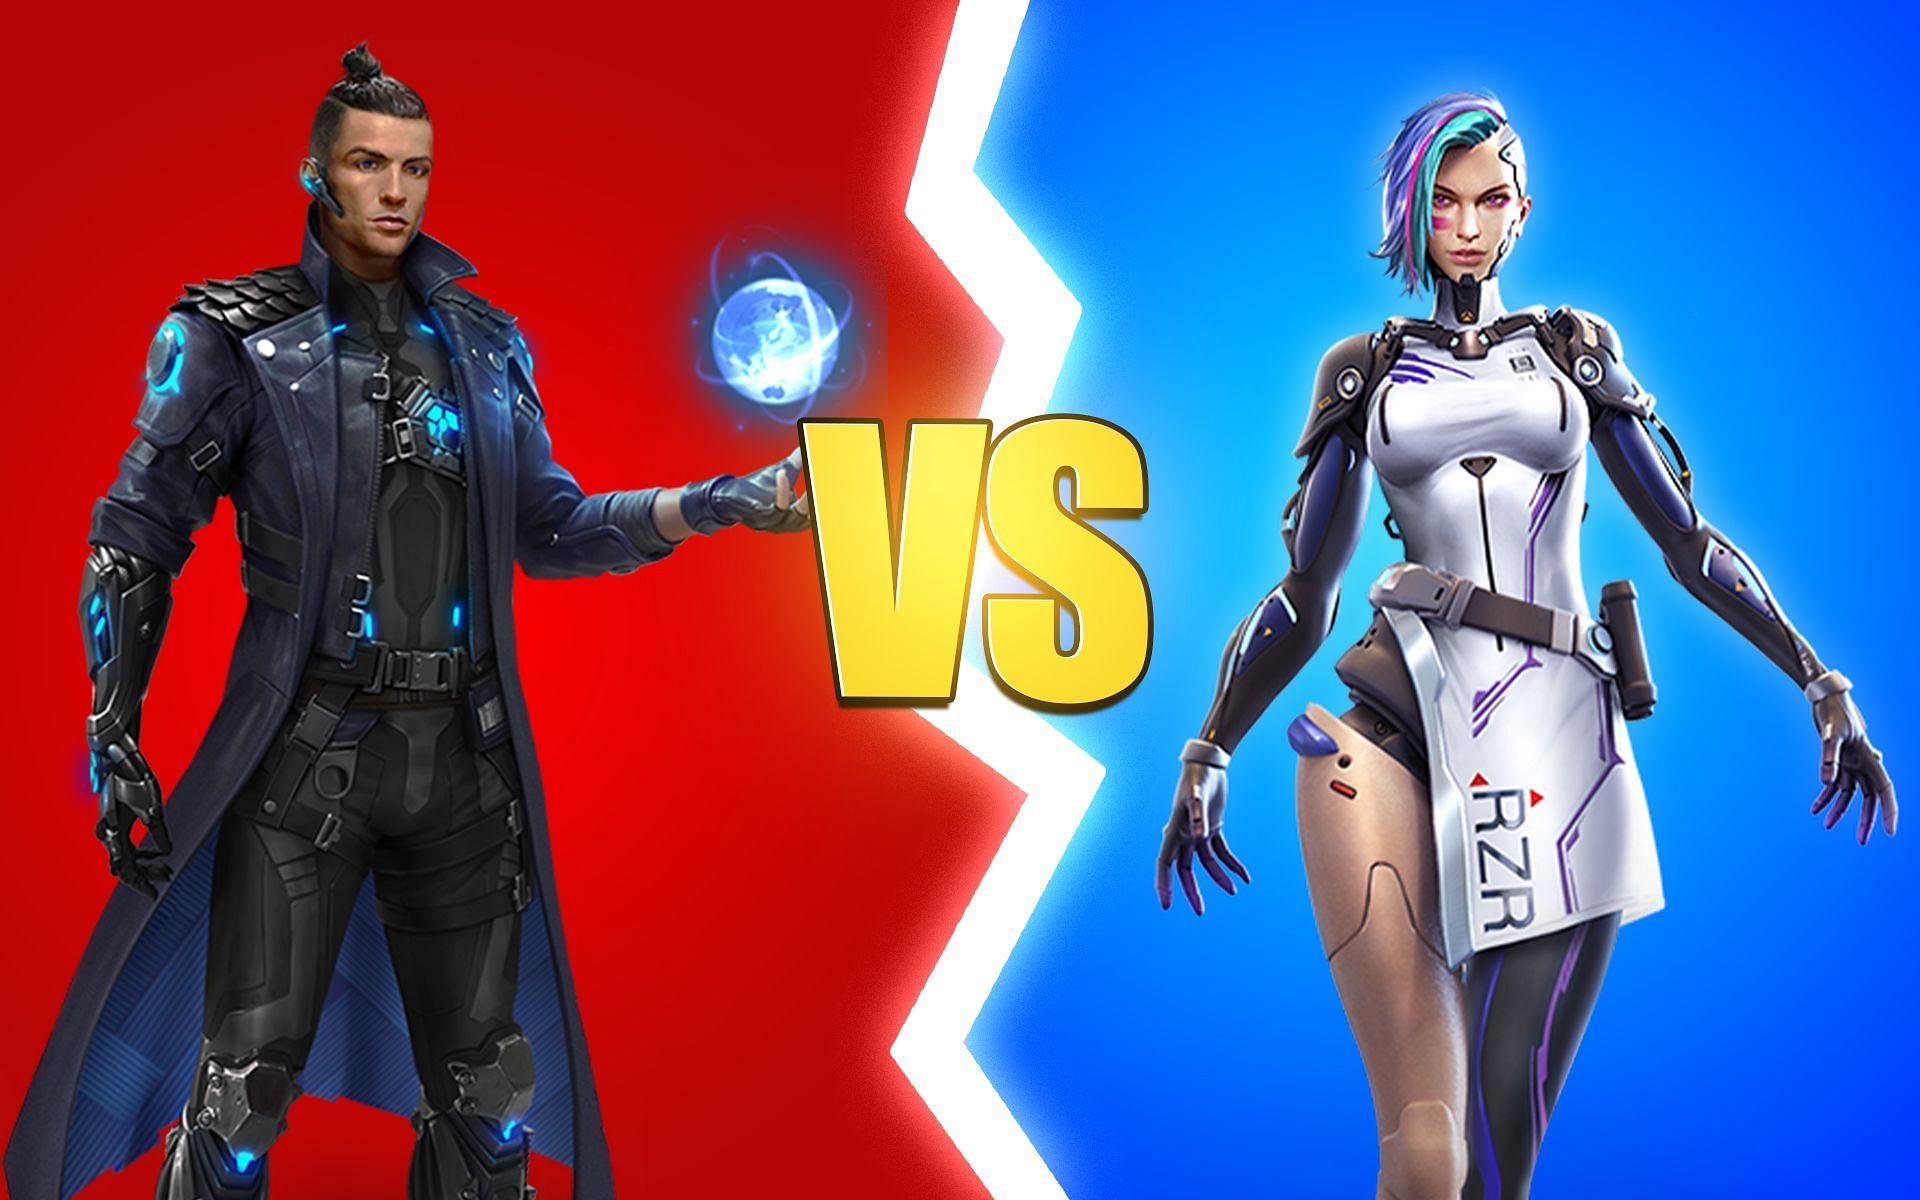 Chrono vs A124: Which Free Fire character has better abilities? (Image via Sportskeeda)